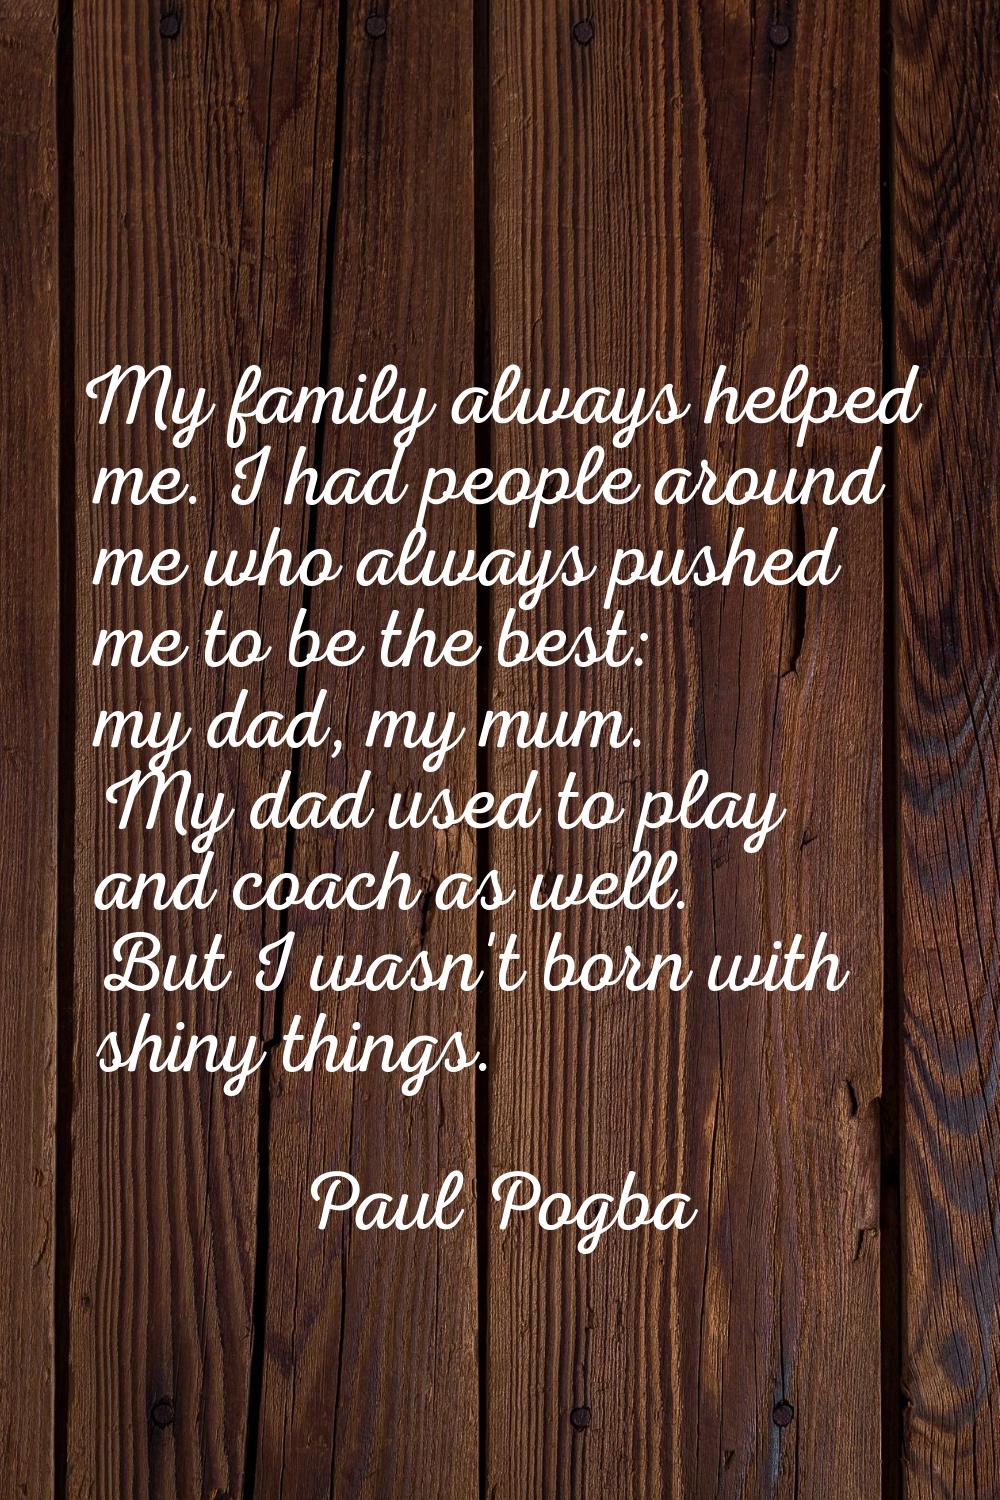 My family always helped me. I had people around me who always pushed me to be the best: my dad, my 